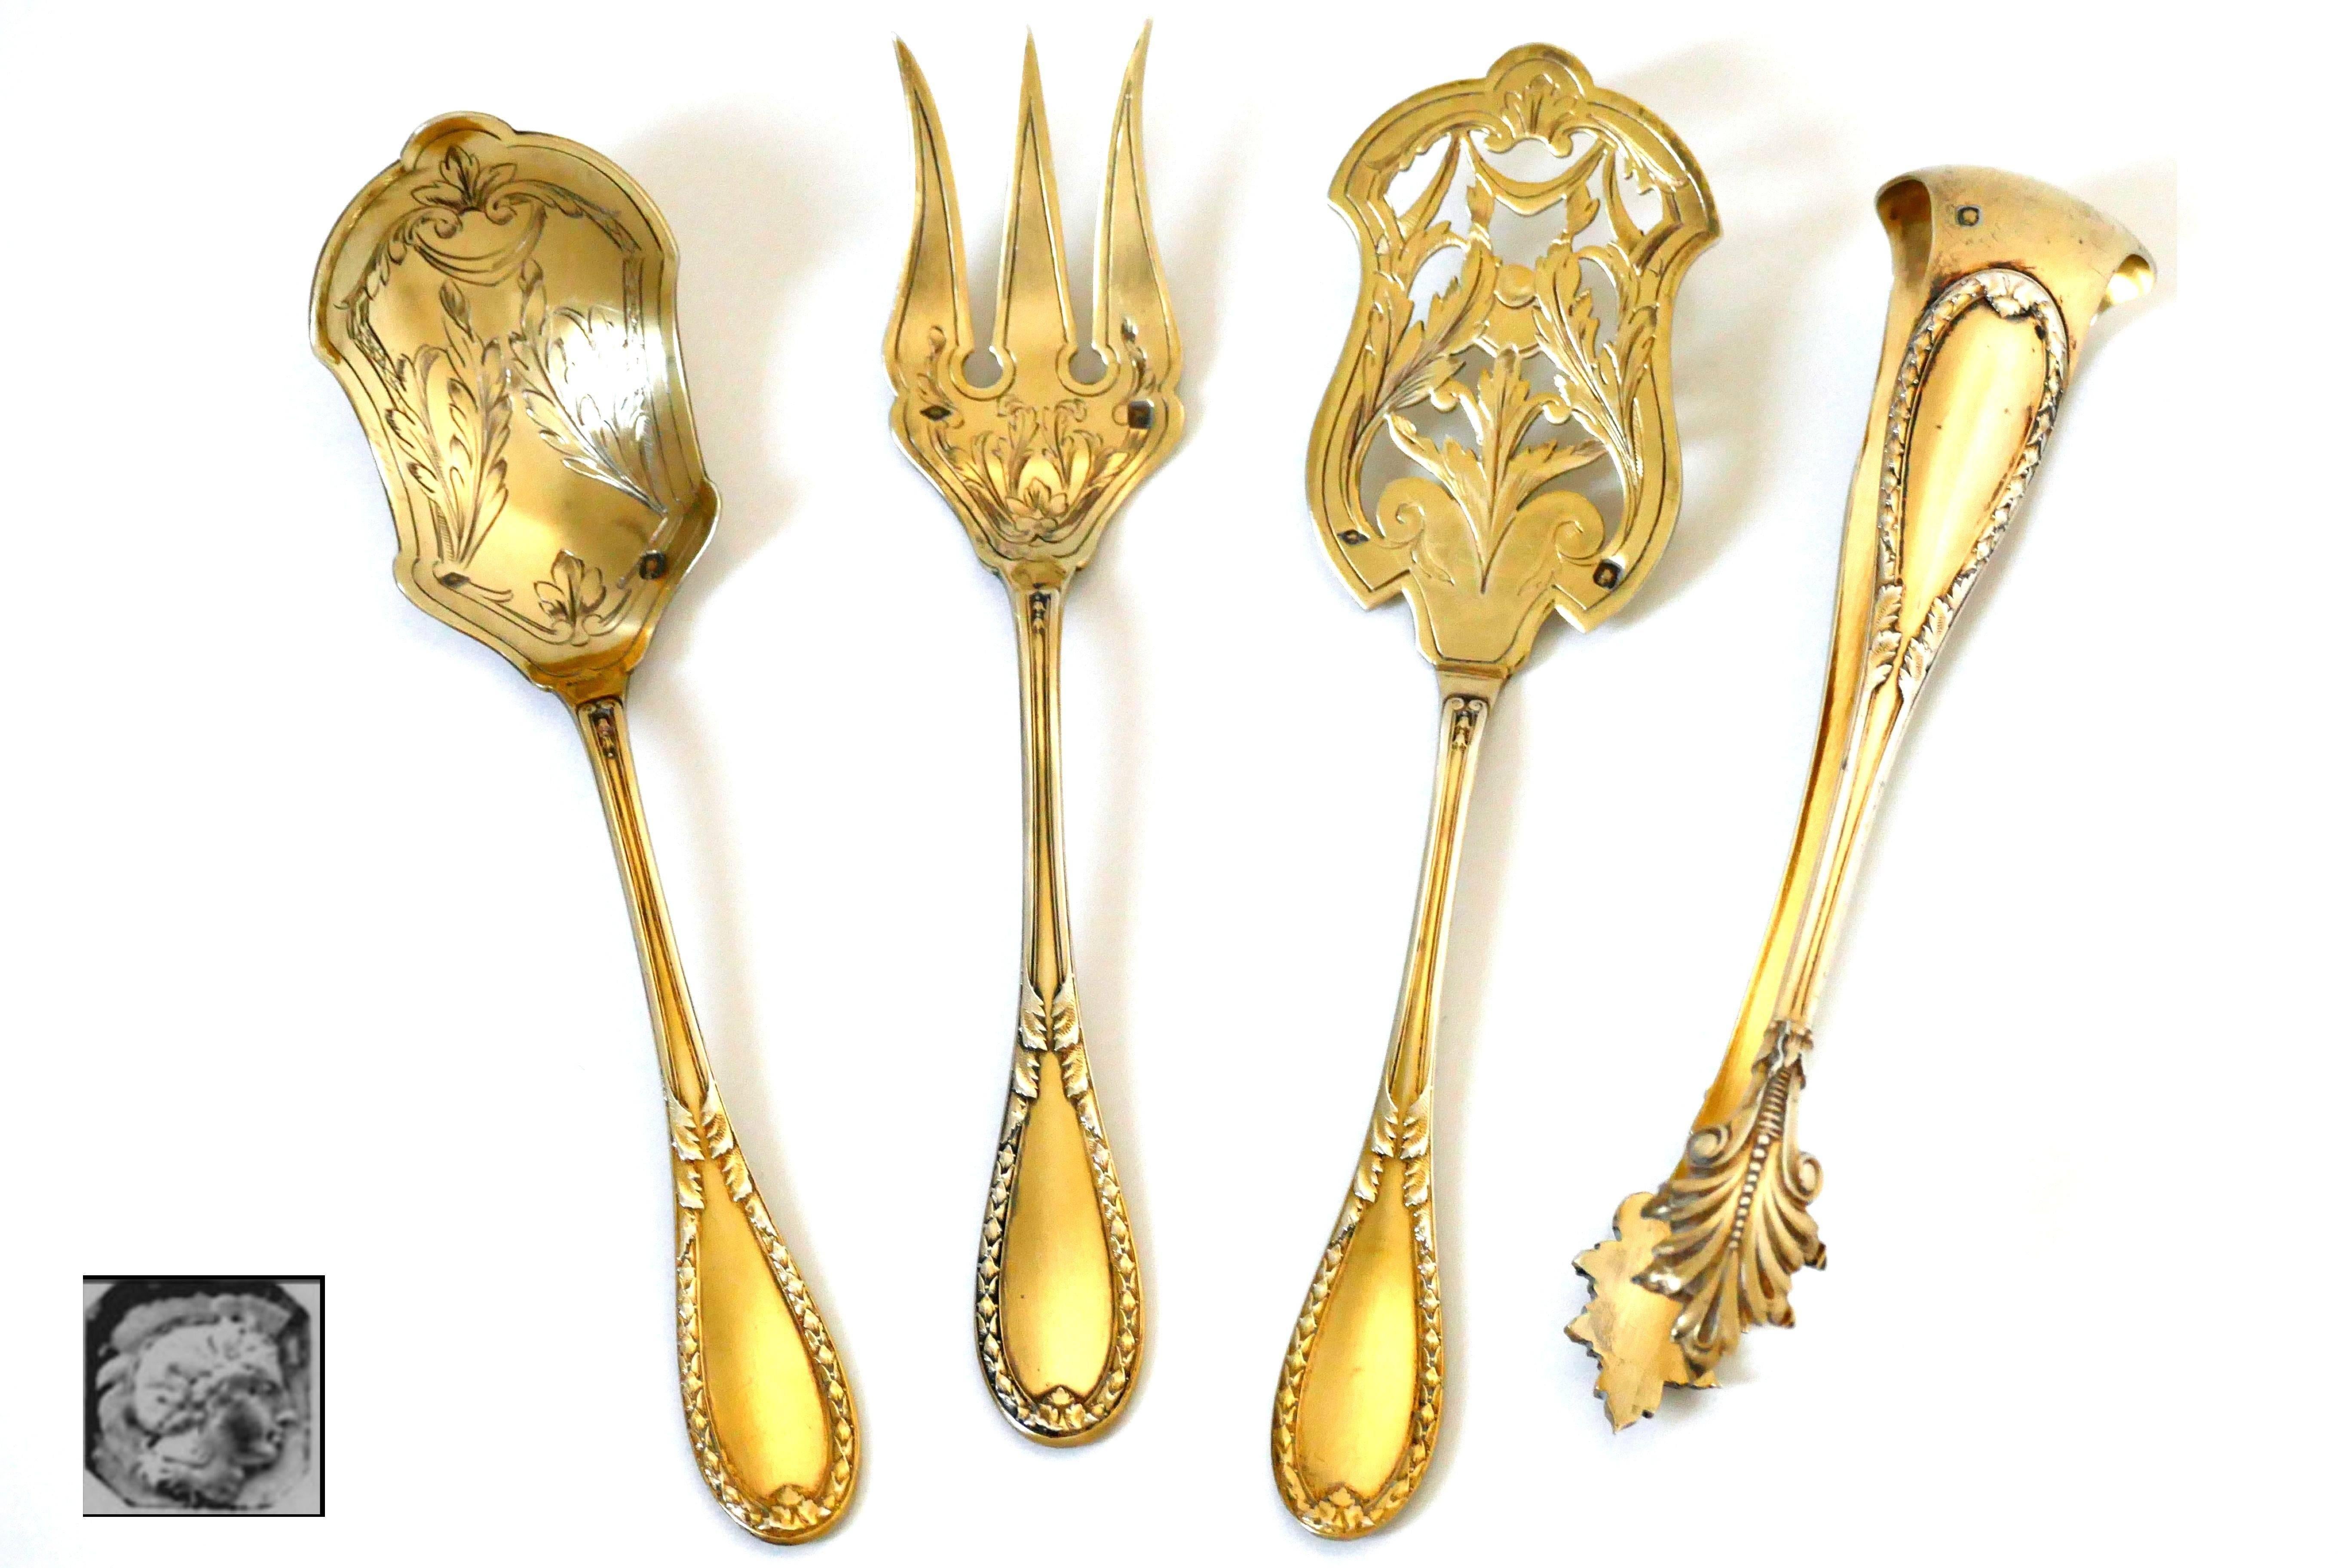 Neoclassical Lapparra French Sterling Silver 18-Karat Gold Hors D'oeuvre Dessert Set Box For Sale